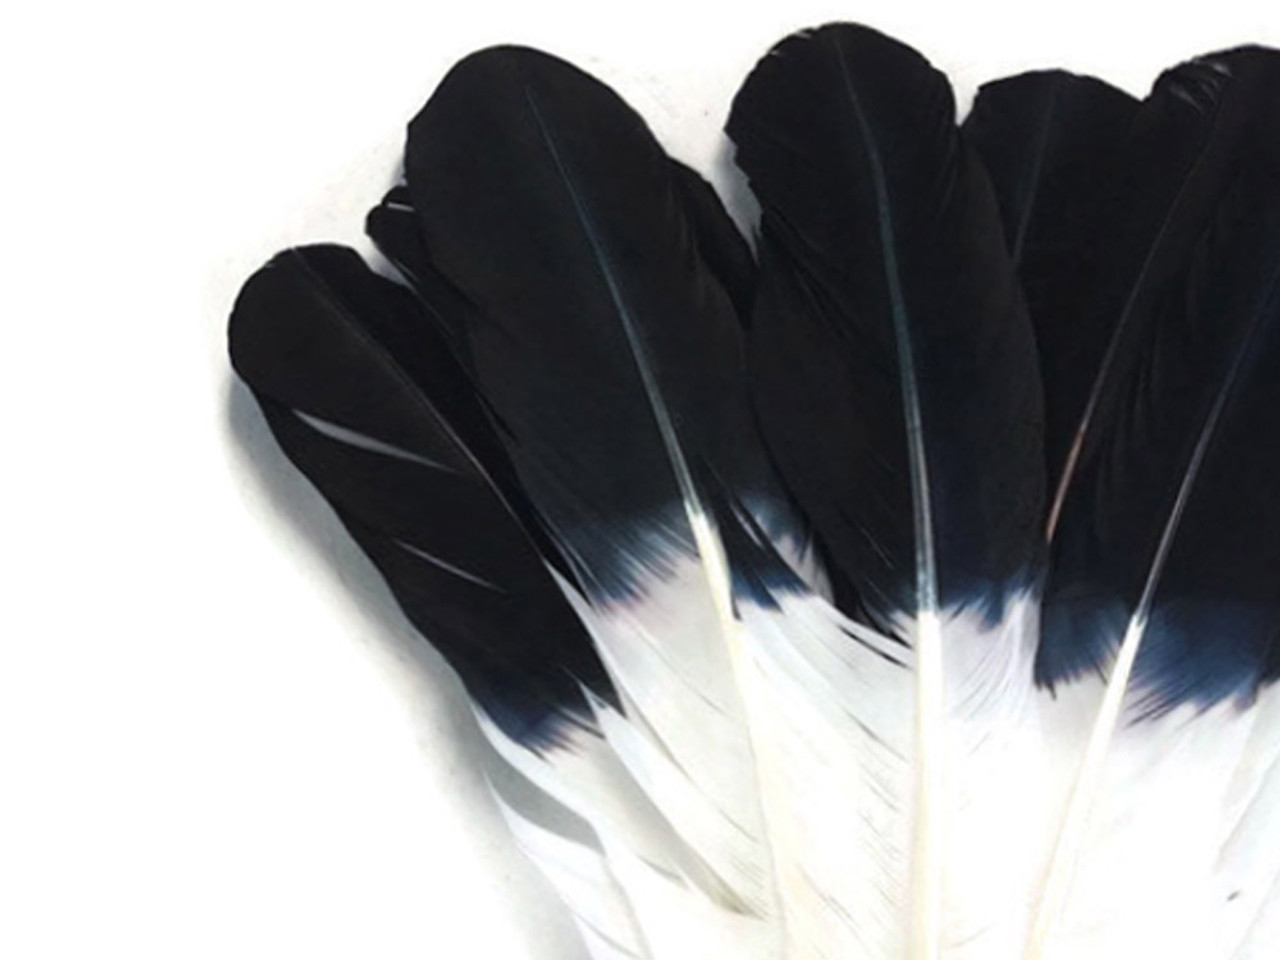 50 Black Feathers 6-7 Inch, Black Quills, Real Feathers, Black Bird Feathers,  Natural Feathers, Black Craft Feathers 